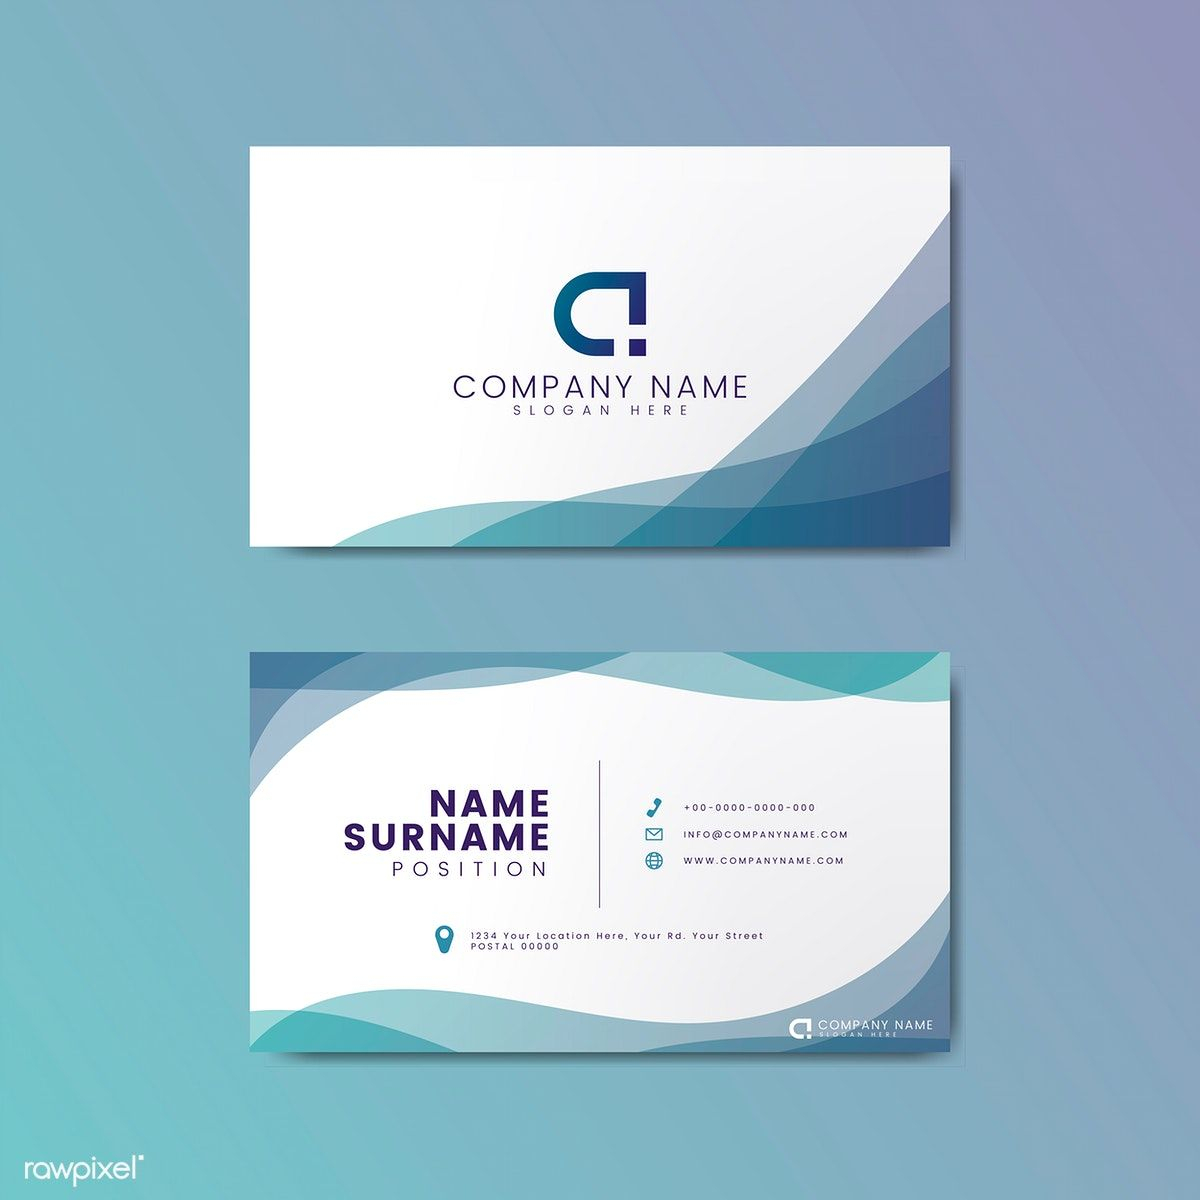 Modern Geometric Business Card Design | Free Image Pertaining To Calling Card Free Template